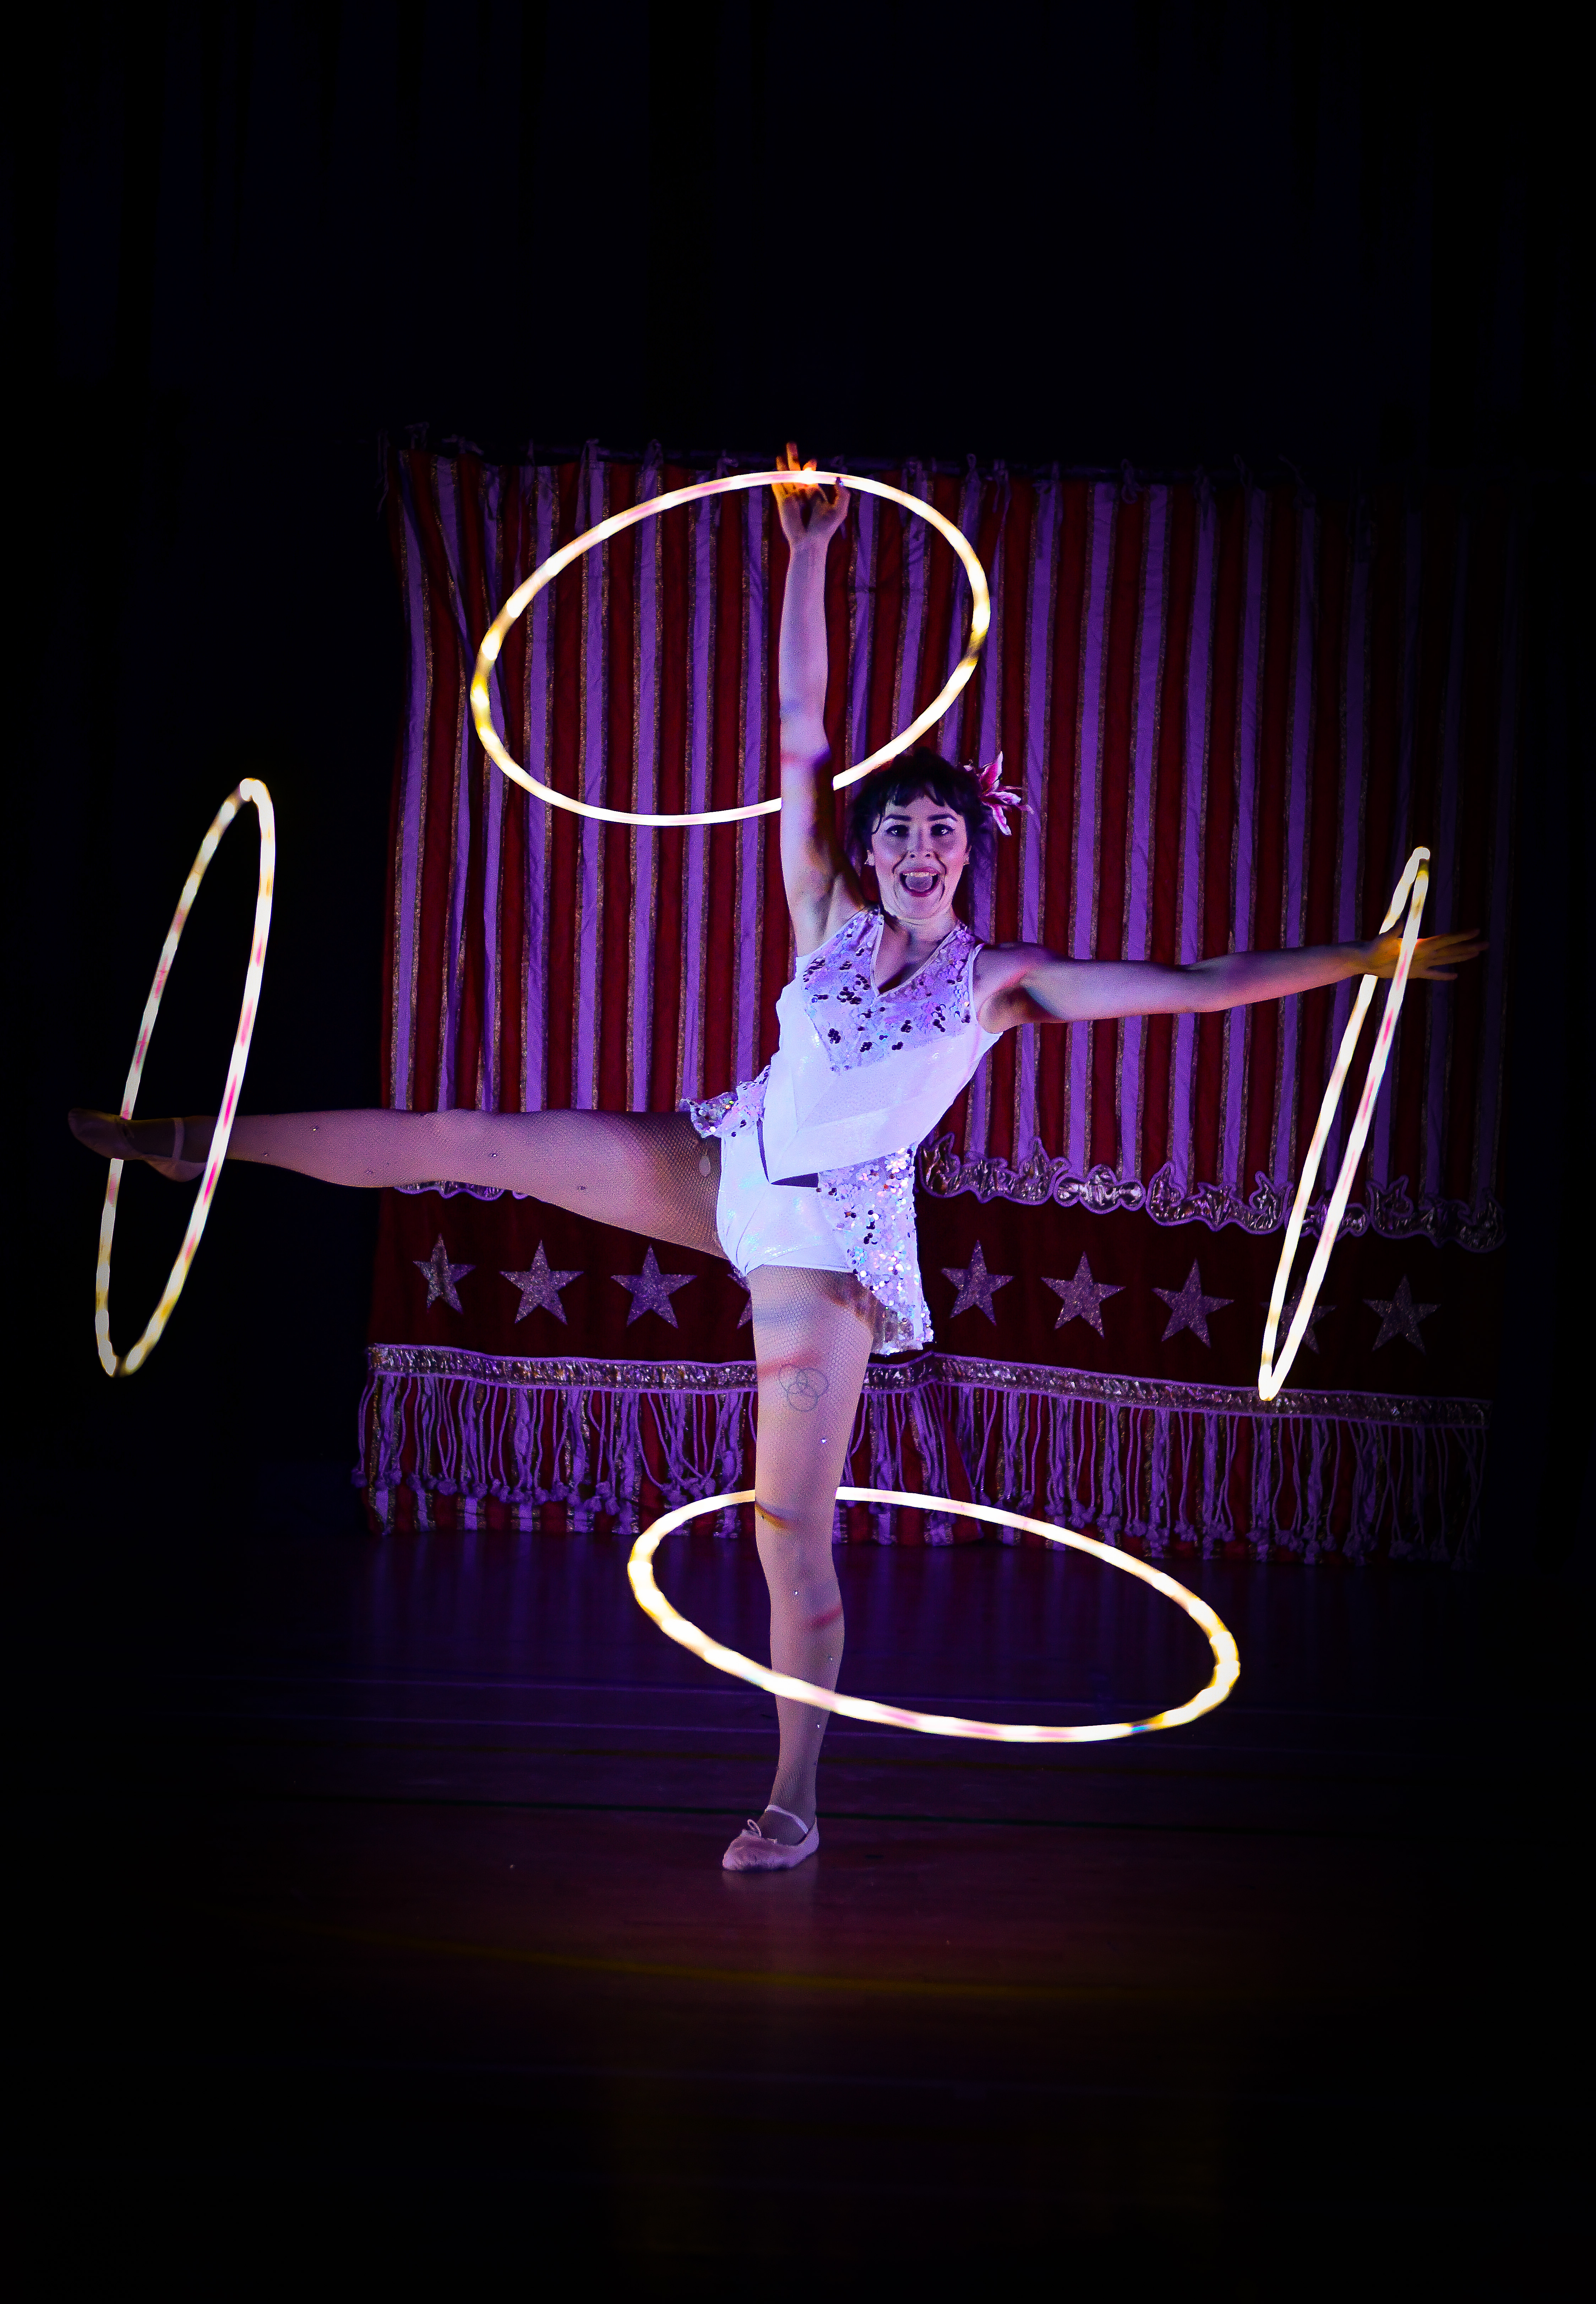 "An image of a woman with some light up hoola hoops"